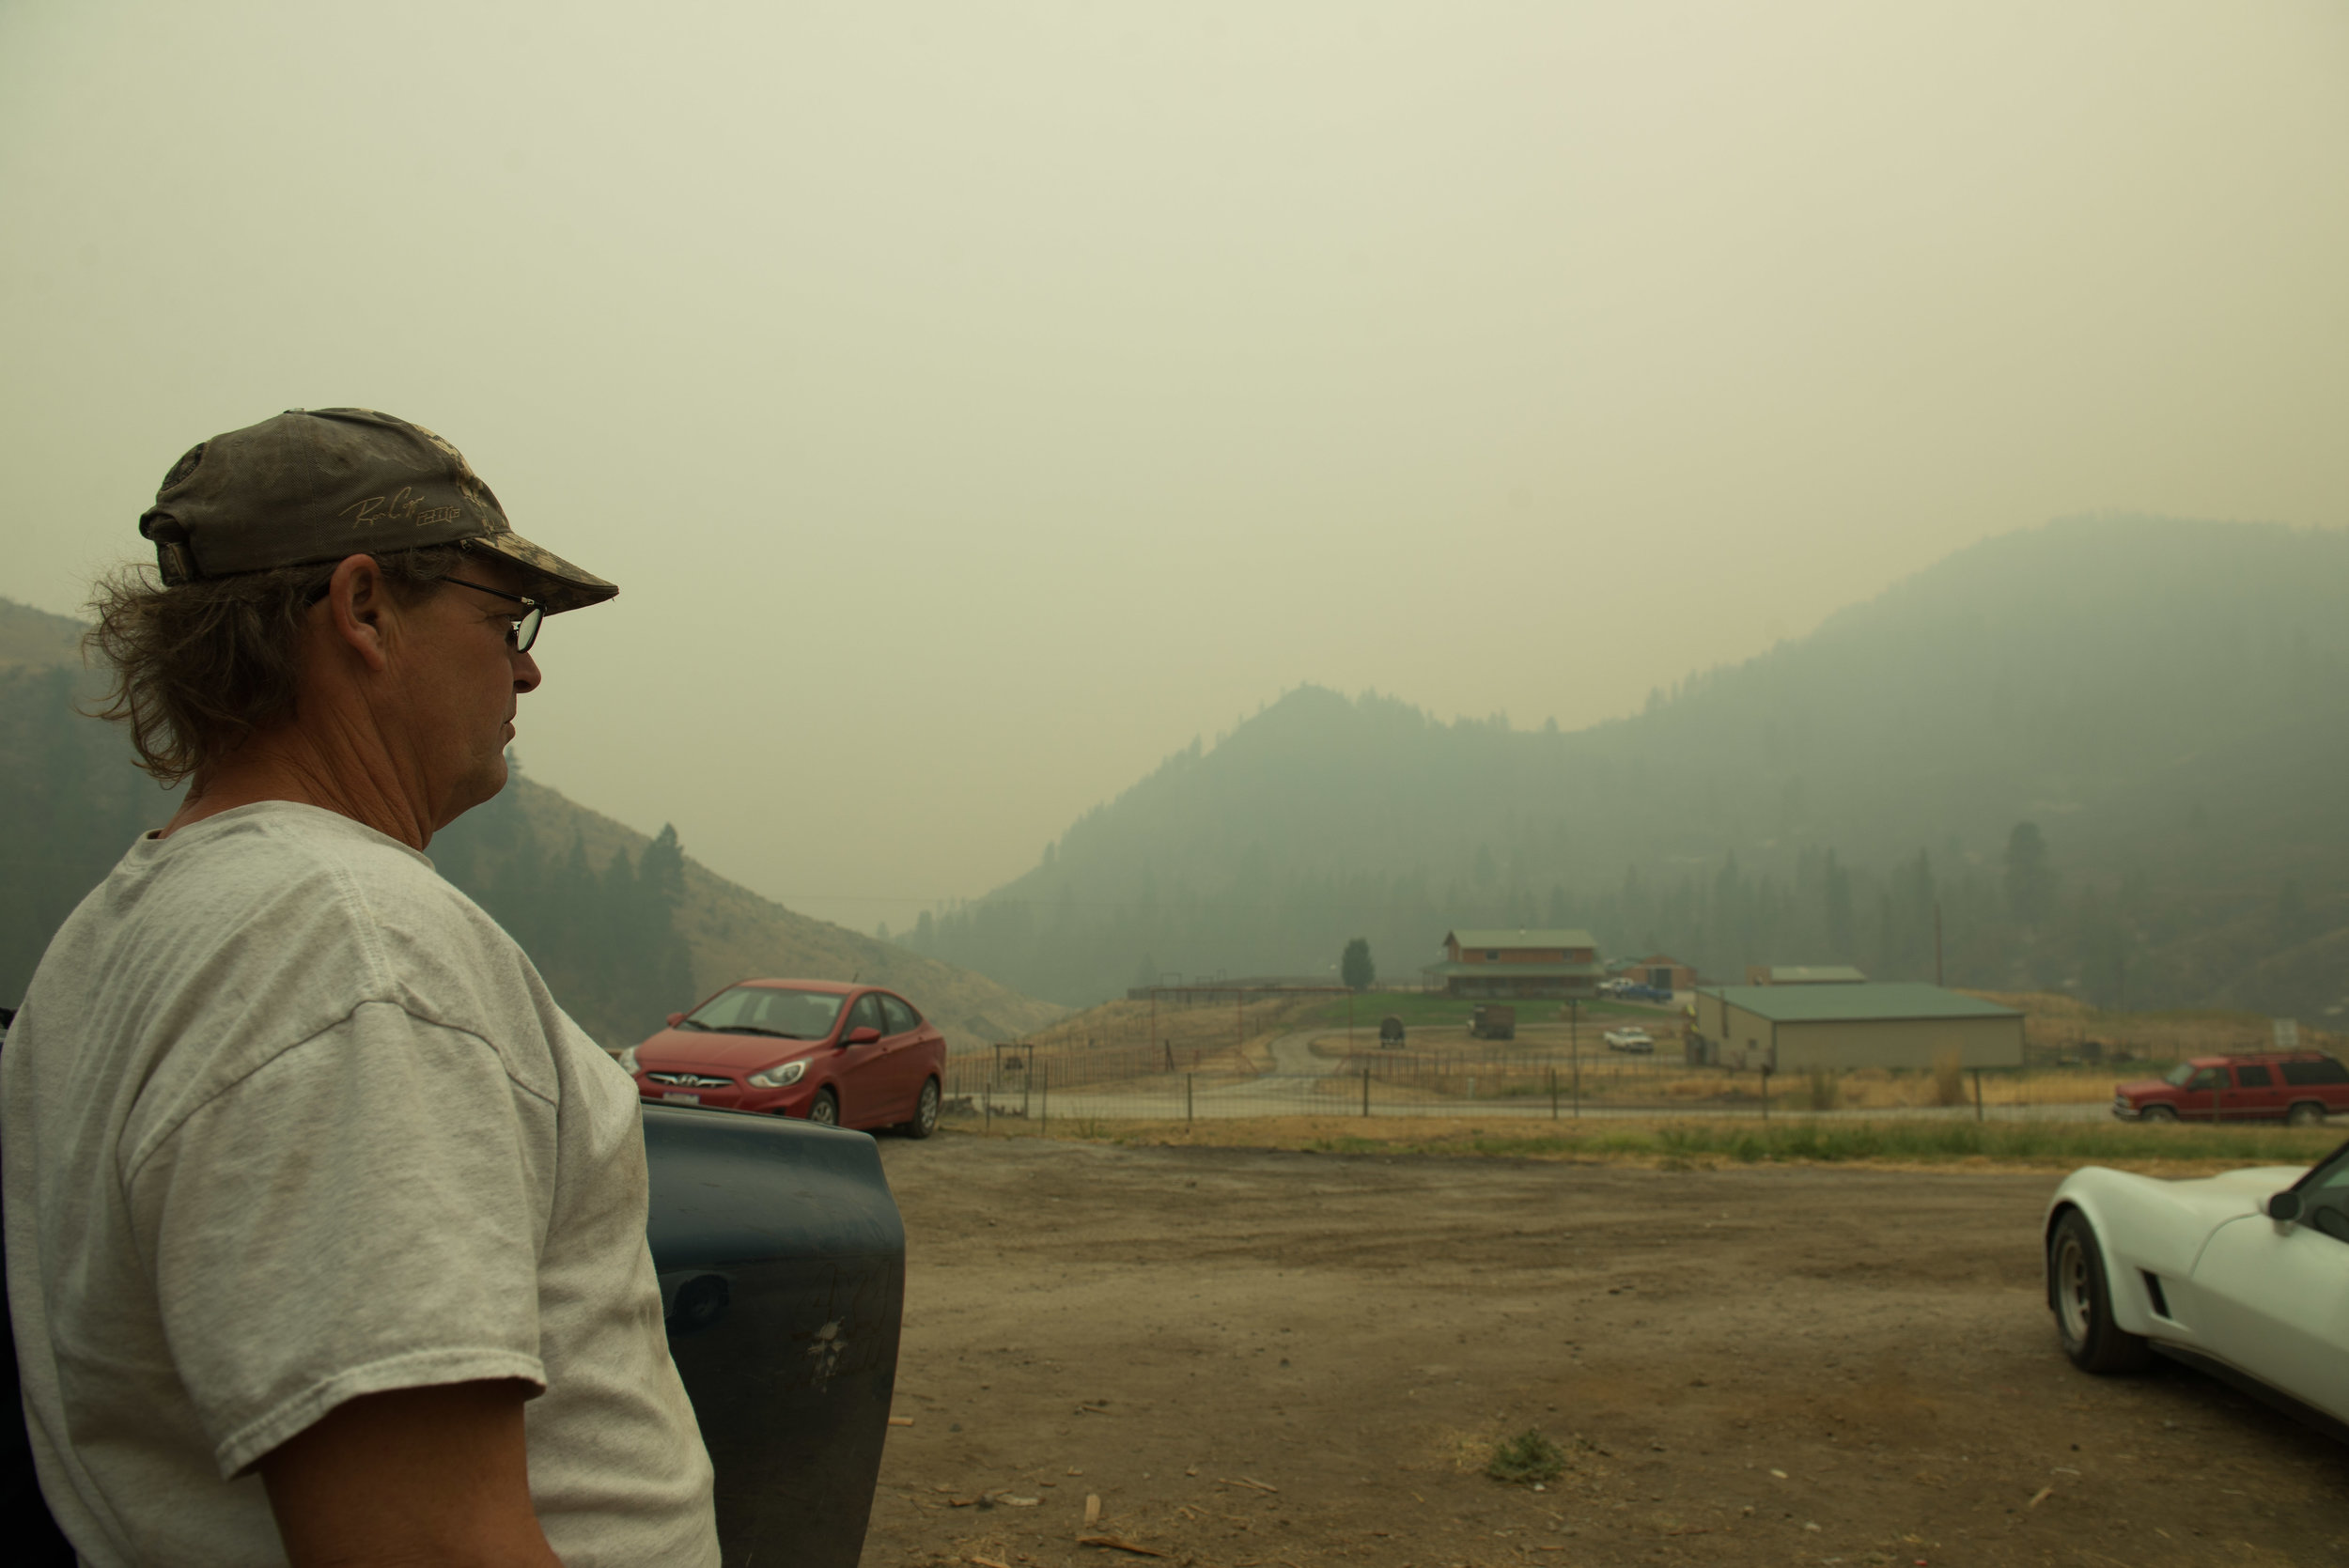  Allan Williams observes scorched hills in front of his home in central Okanogan County, Monday August 24, 2015. Two nights before, Allan assisted firefighters as they cut a fire line with a tractor and other equipment so fire would not spread to his